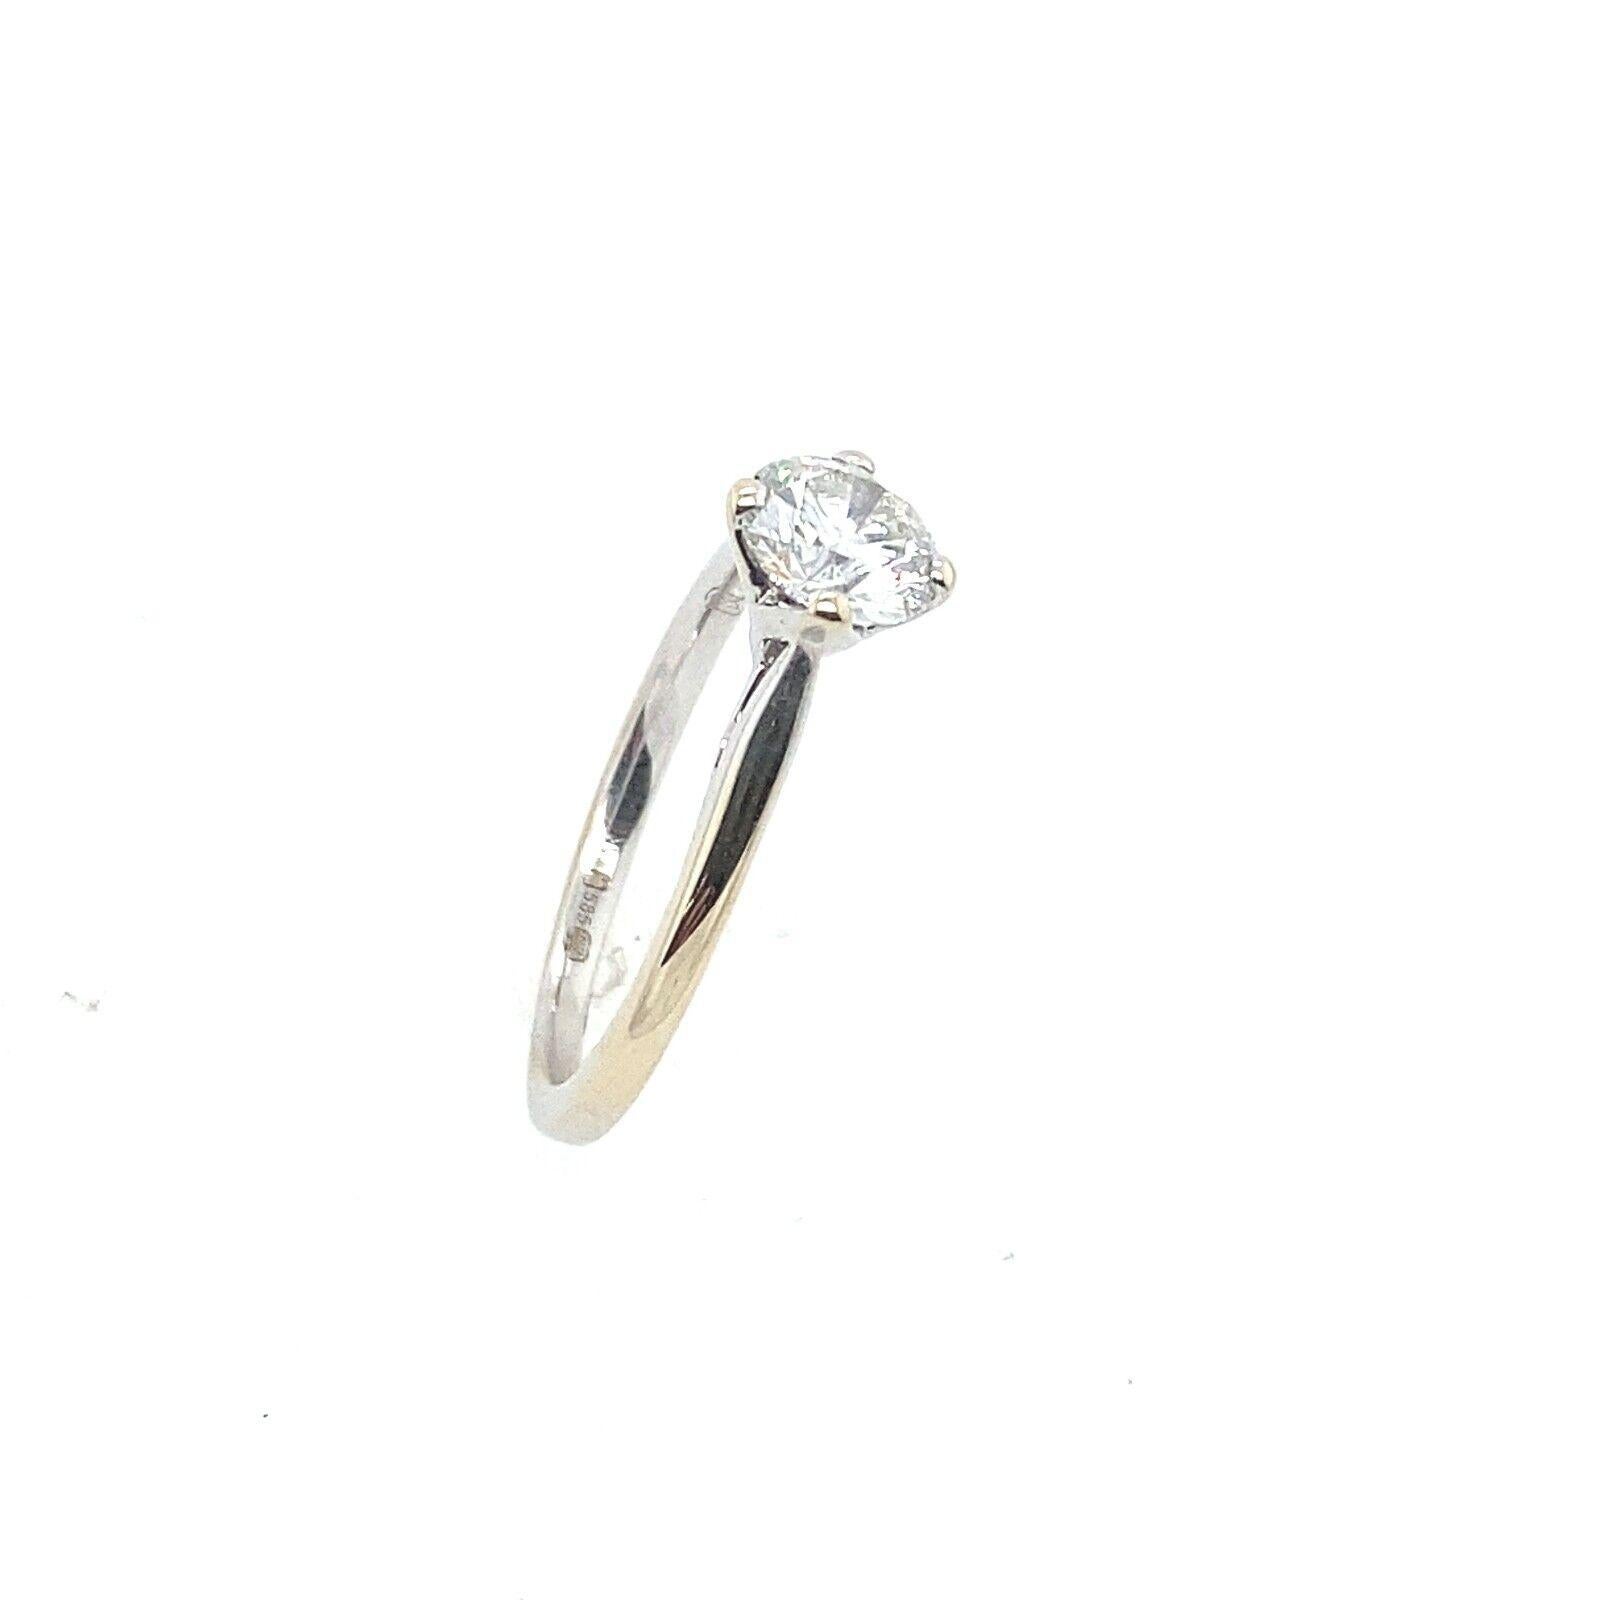 The 14ct White Gold band is set with a 0.84ct I/SI2 Round Brilliant Cut natural Diamond in a classic 4-claw setting and finished with high polished edges. This ring is elegant and beautiful. GIA certificate.

Additional Information:
Total Diamond